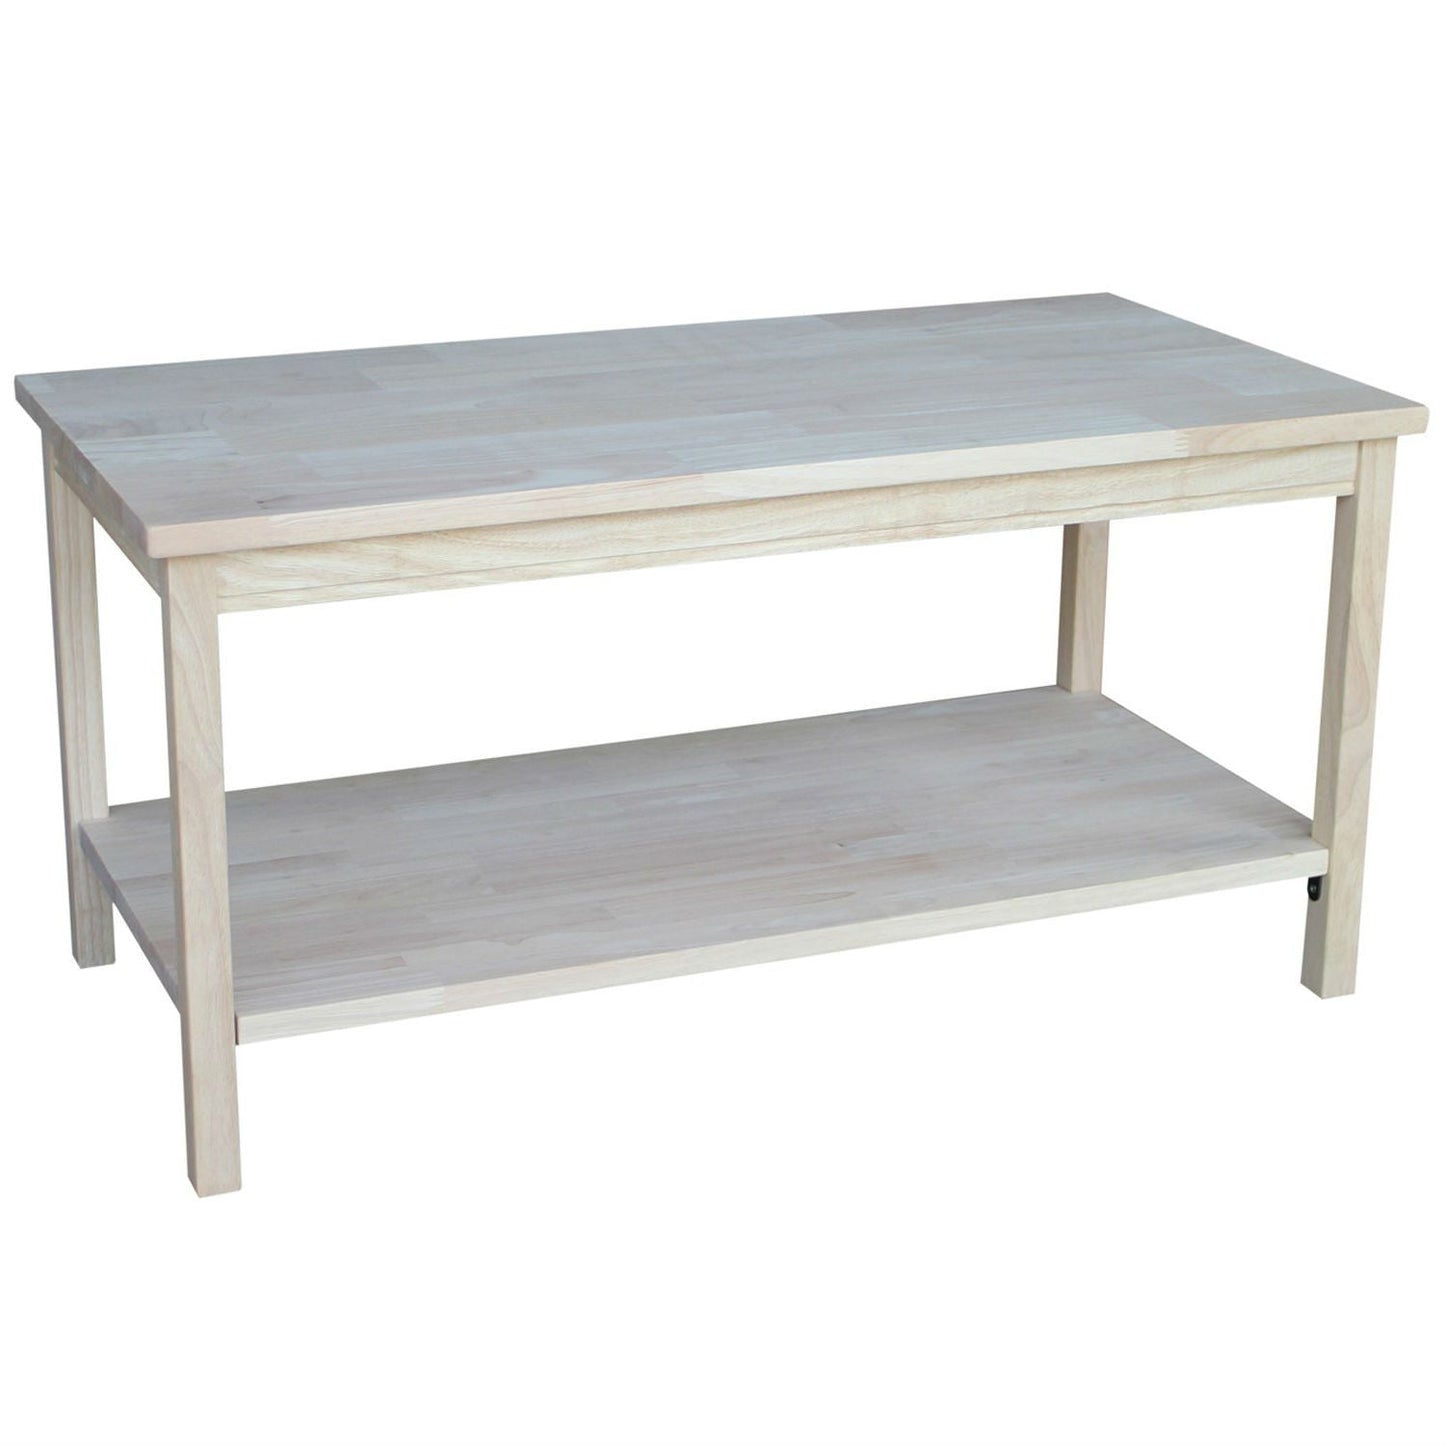 Living Room > Coffee Tables - Unfinished Solid Wood Rectangular Coffee Table With Bottom Shelf